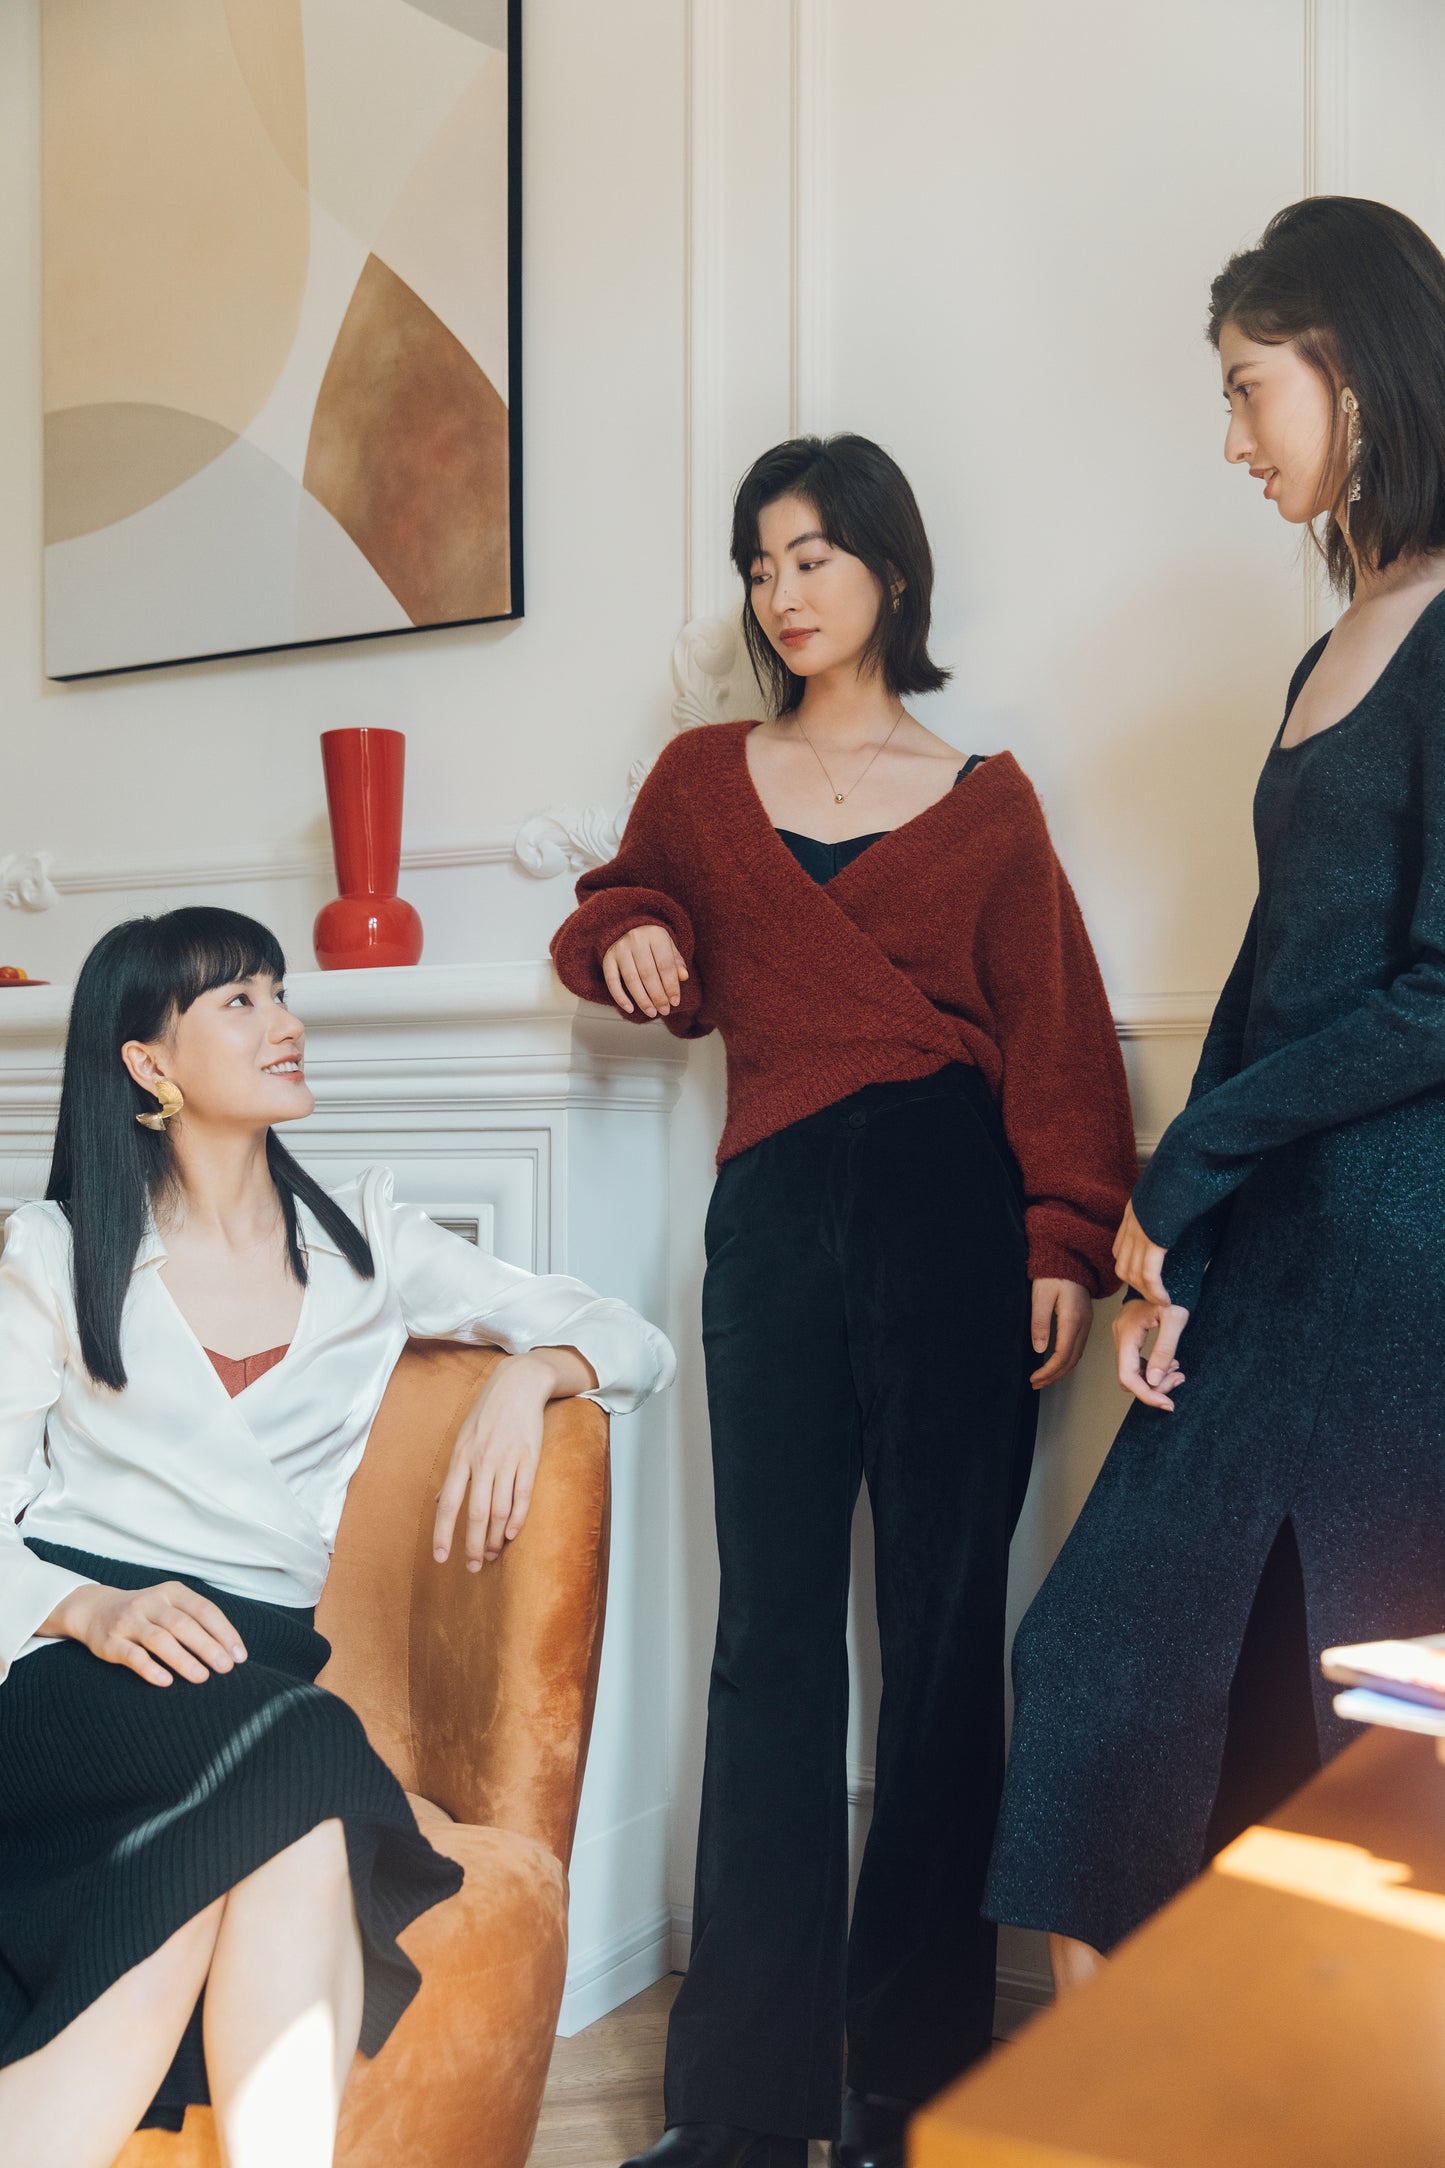 three women talking next the the fireplace. woman on the left wearing a white satin shirt siting on the sofa, woman in the middle wearing a red wrap cardigan and  a black trousers, women on the right wearing a dress